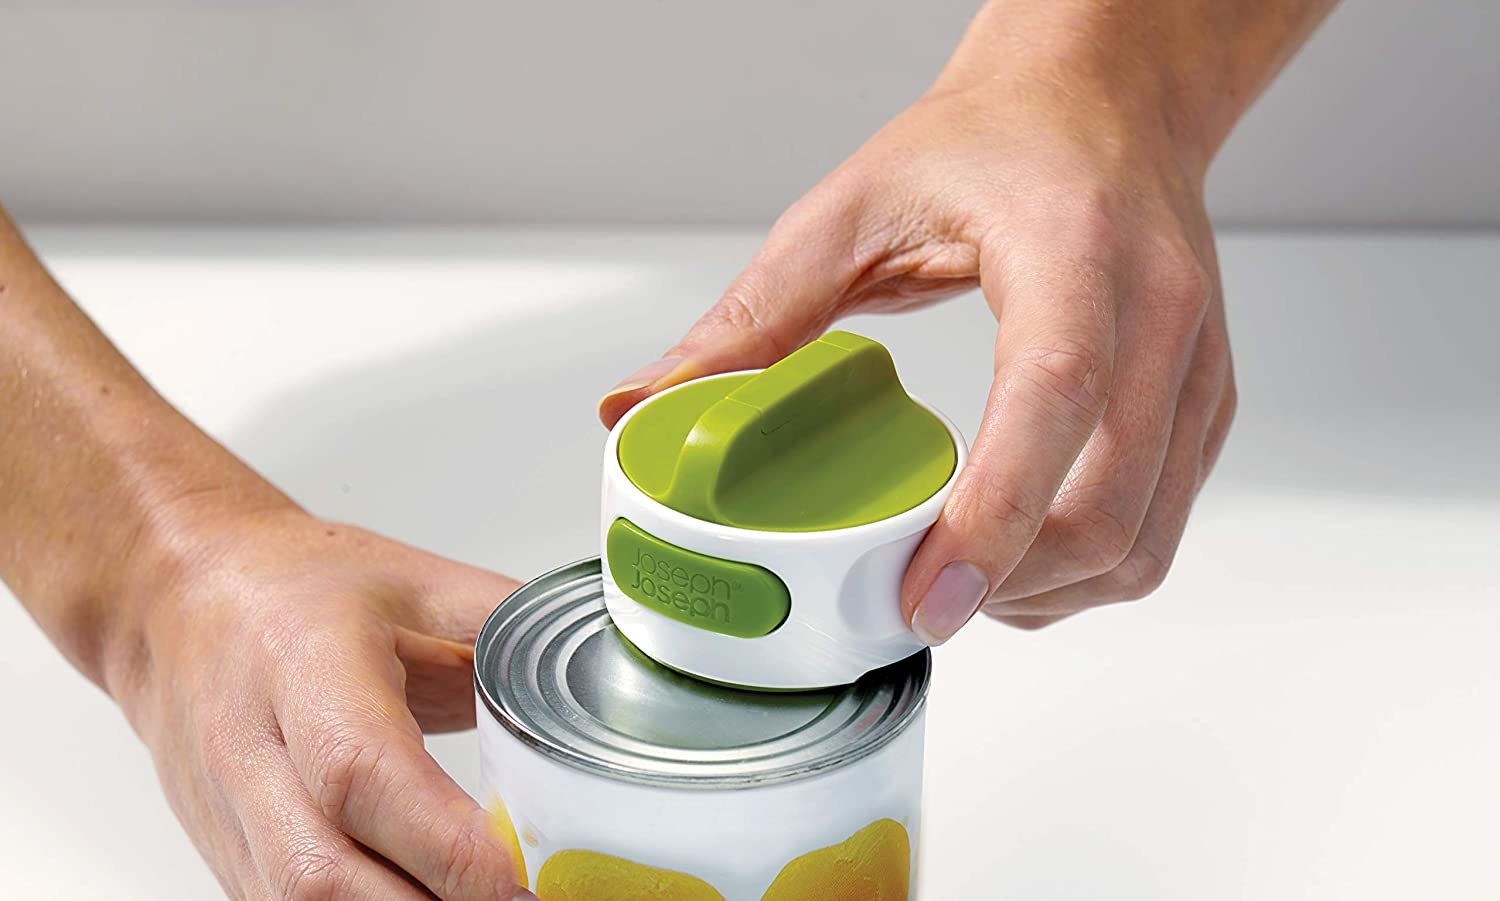 A person using the can opener on a small can